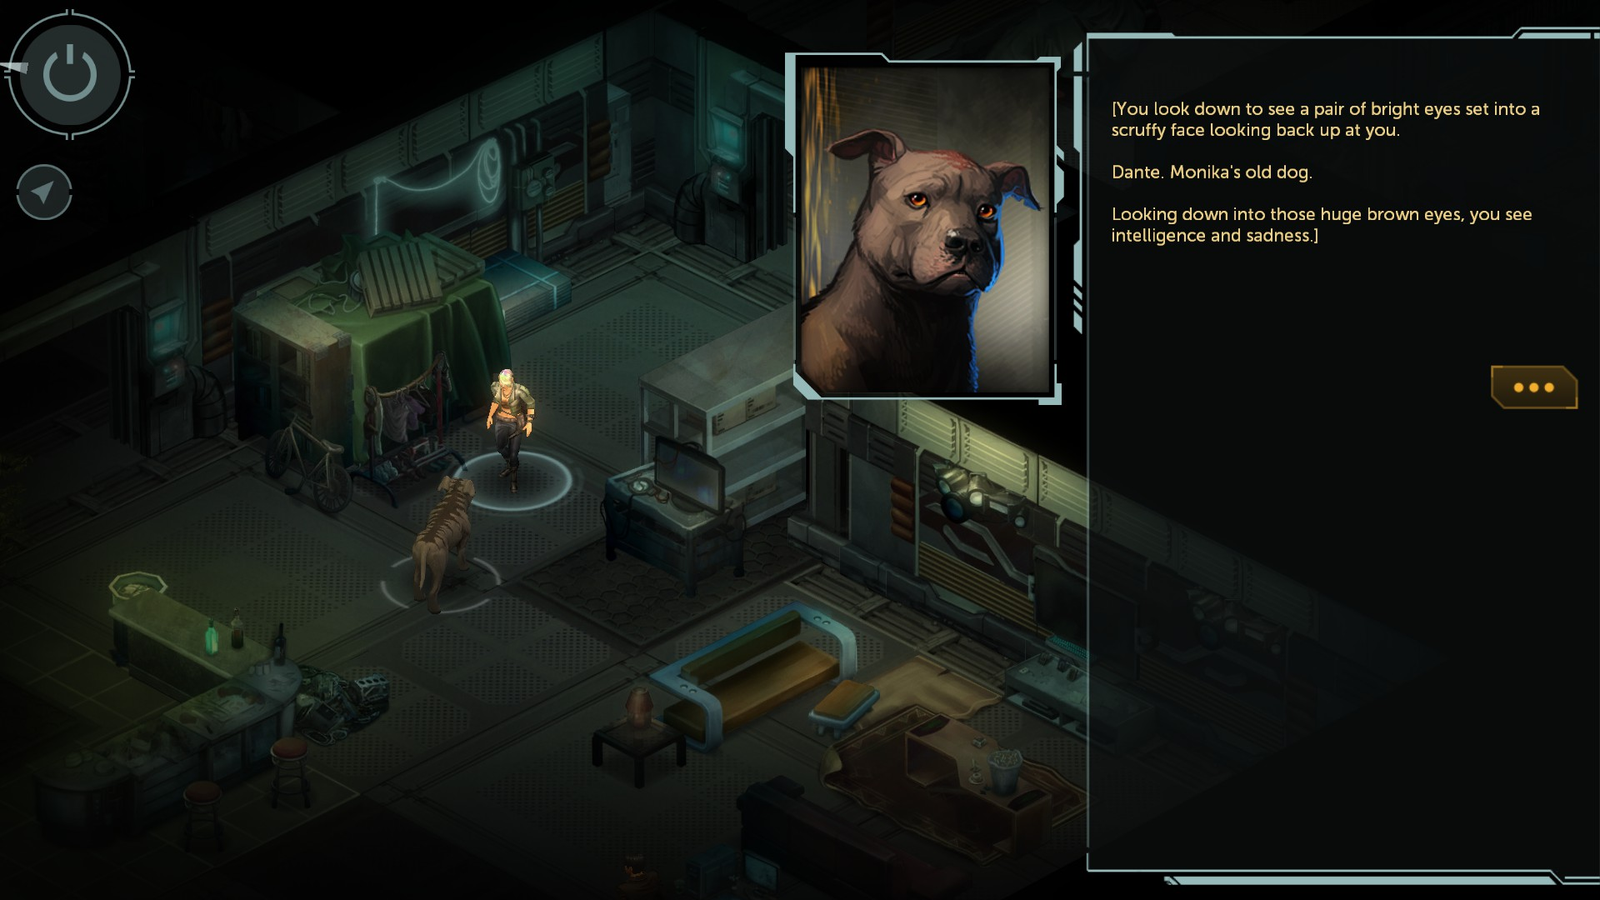 Shadowrun Trilogy arriving on consoles in June, coming to Game